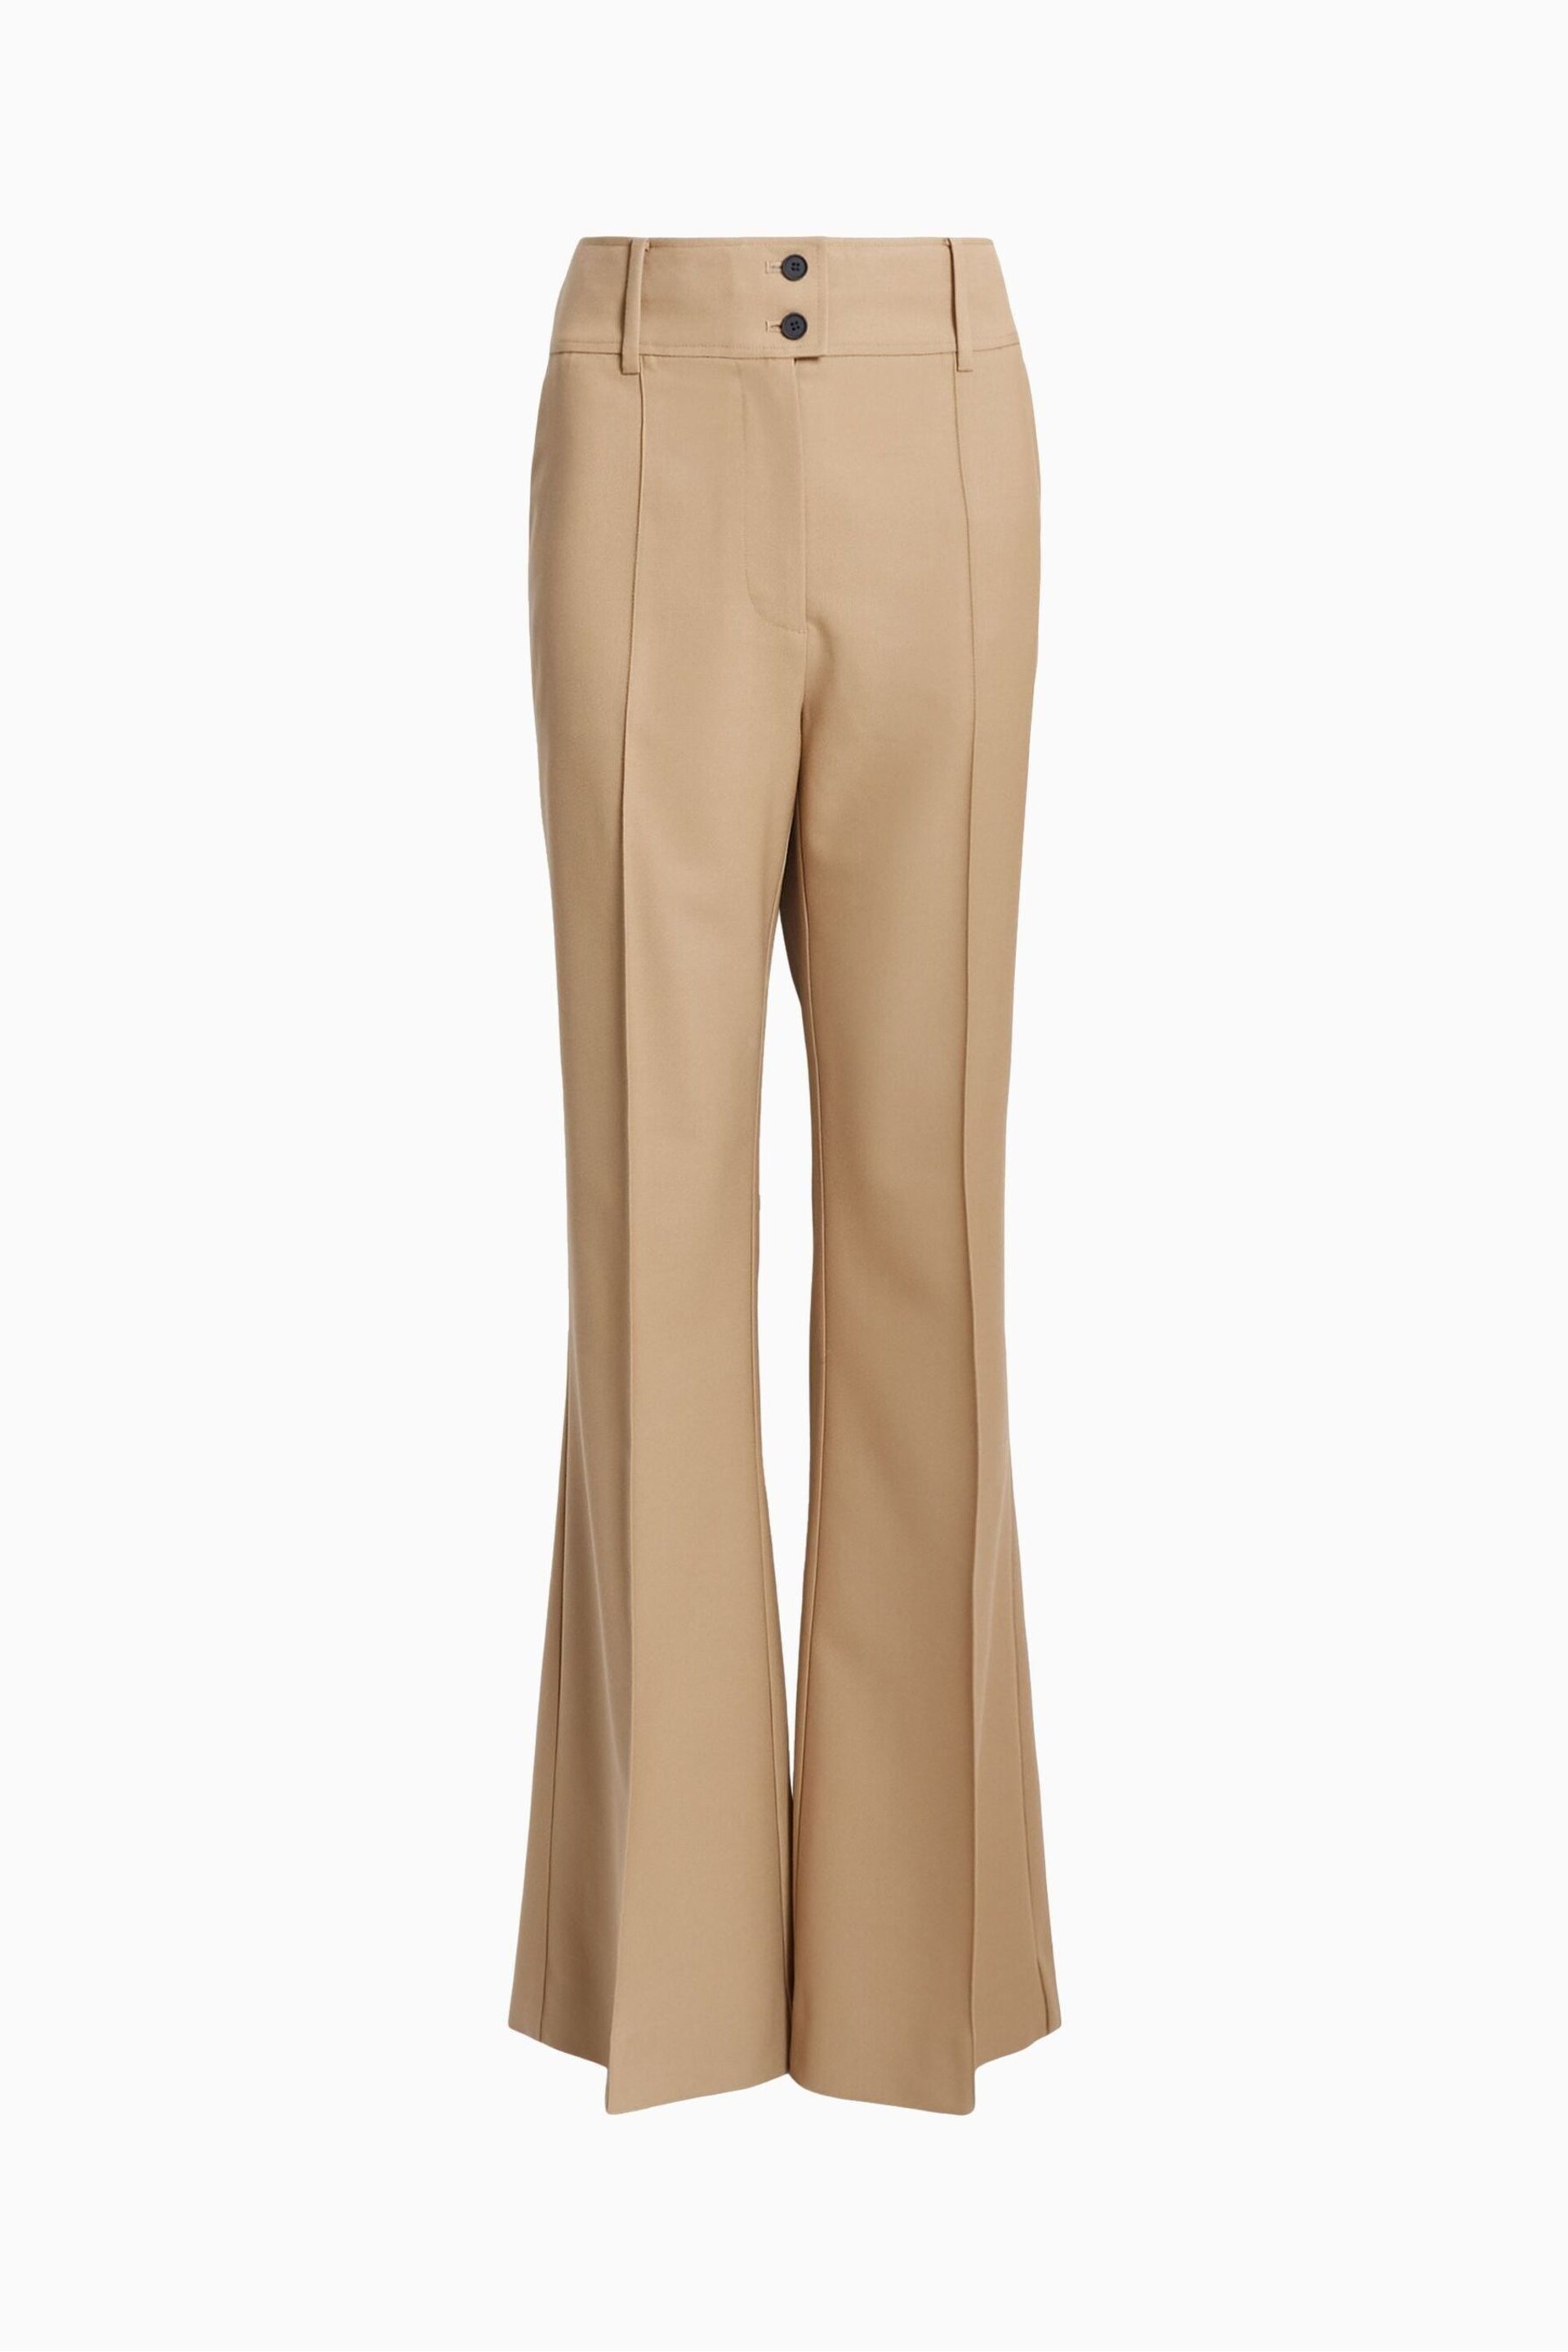 AllSaints Sevenh Brown Trousers - Image 6 of 6